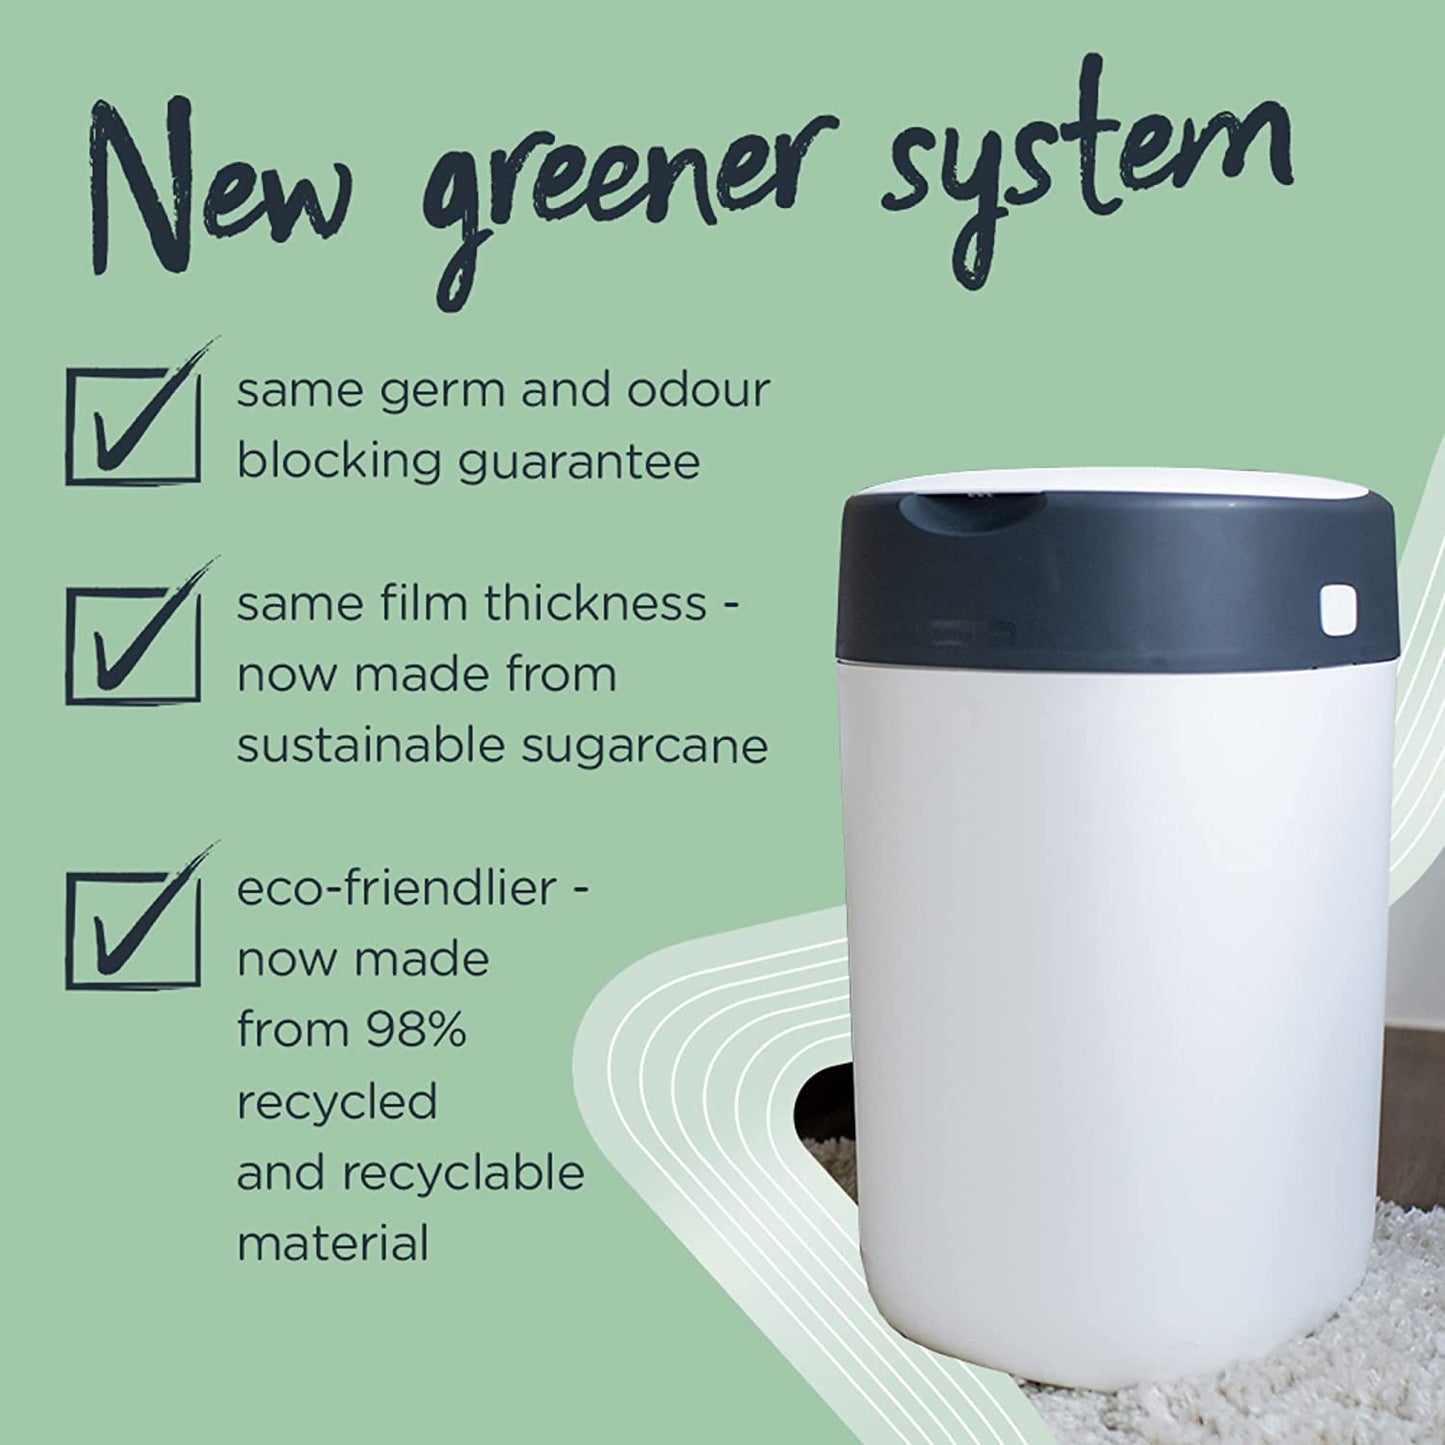 Tommee Tippee Twist & Click Nappy Disposal Bin- White